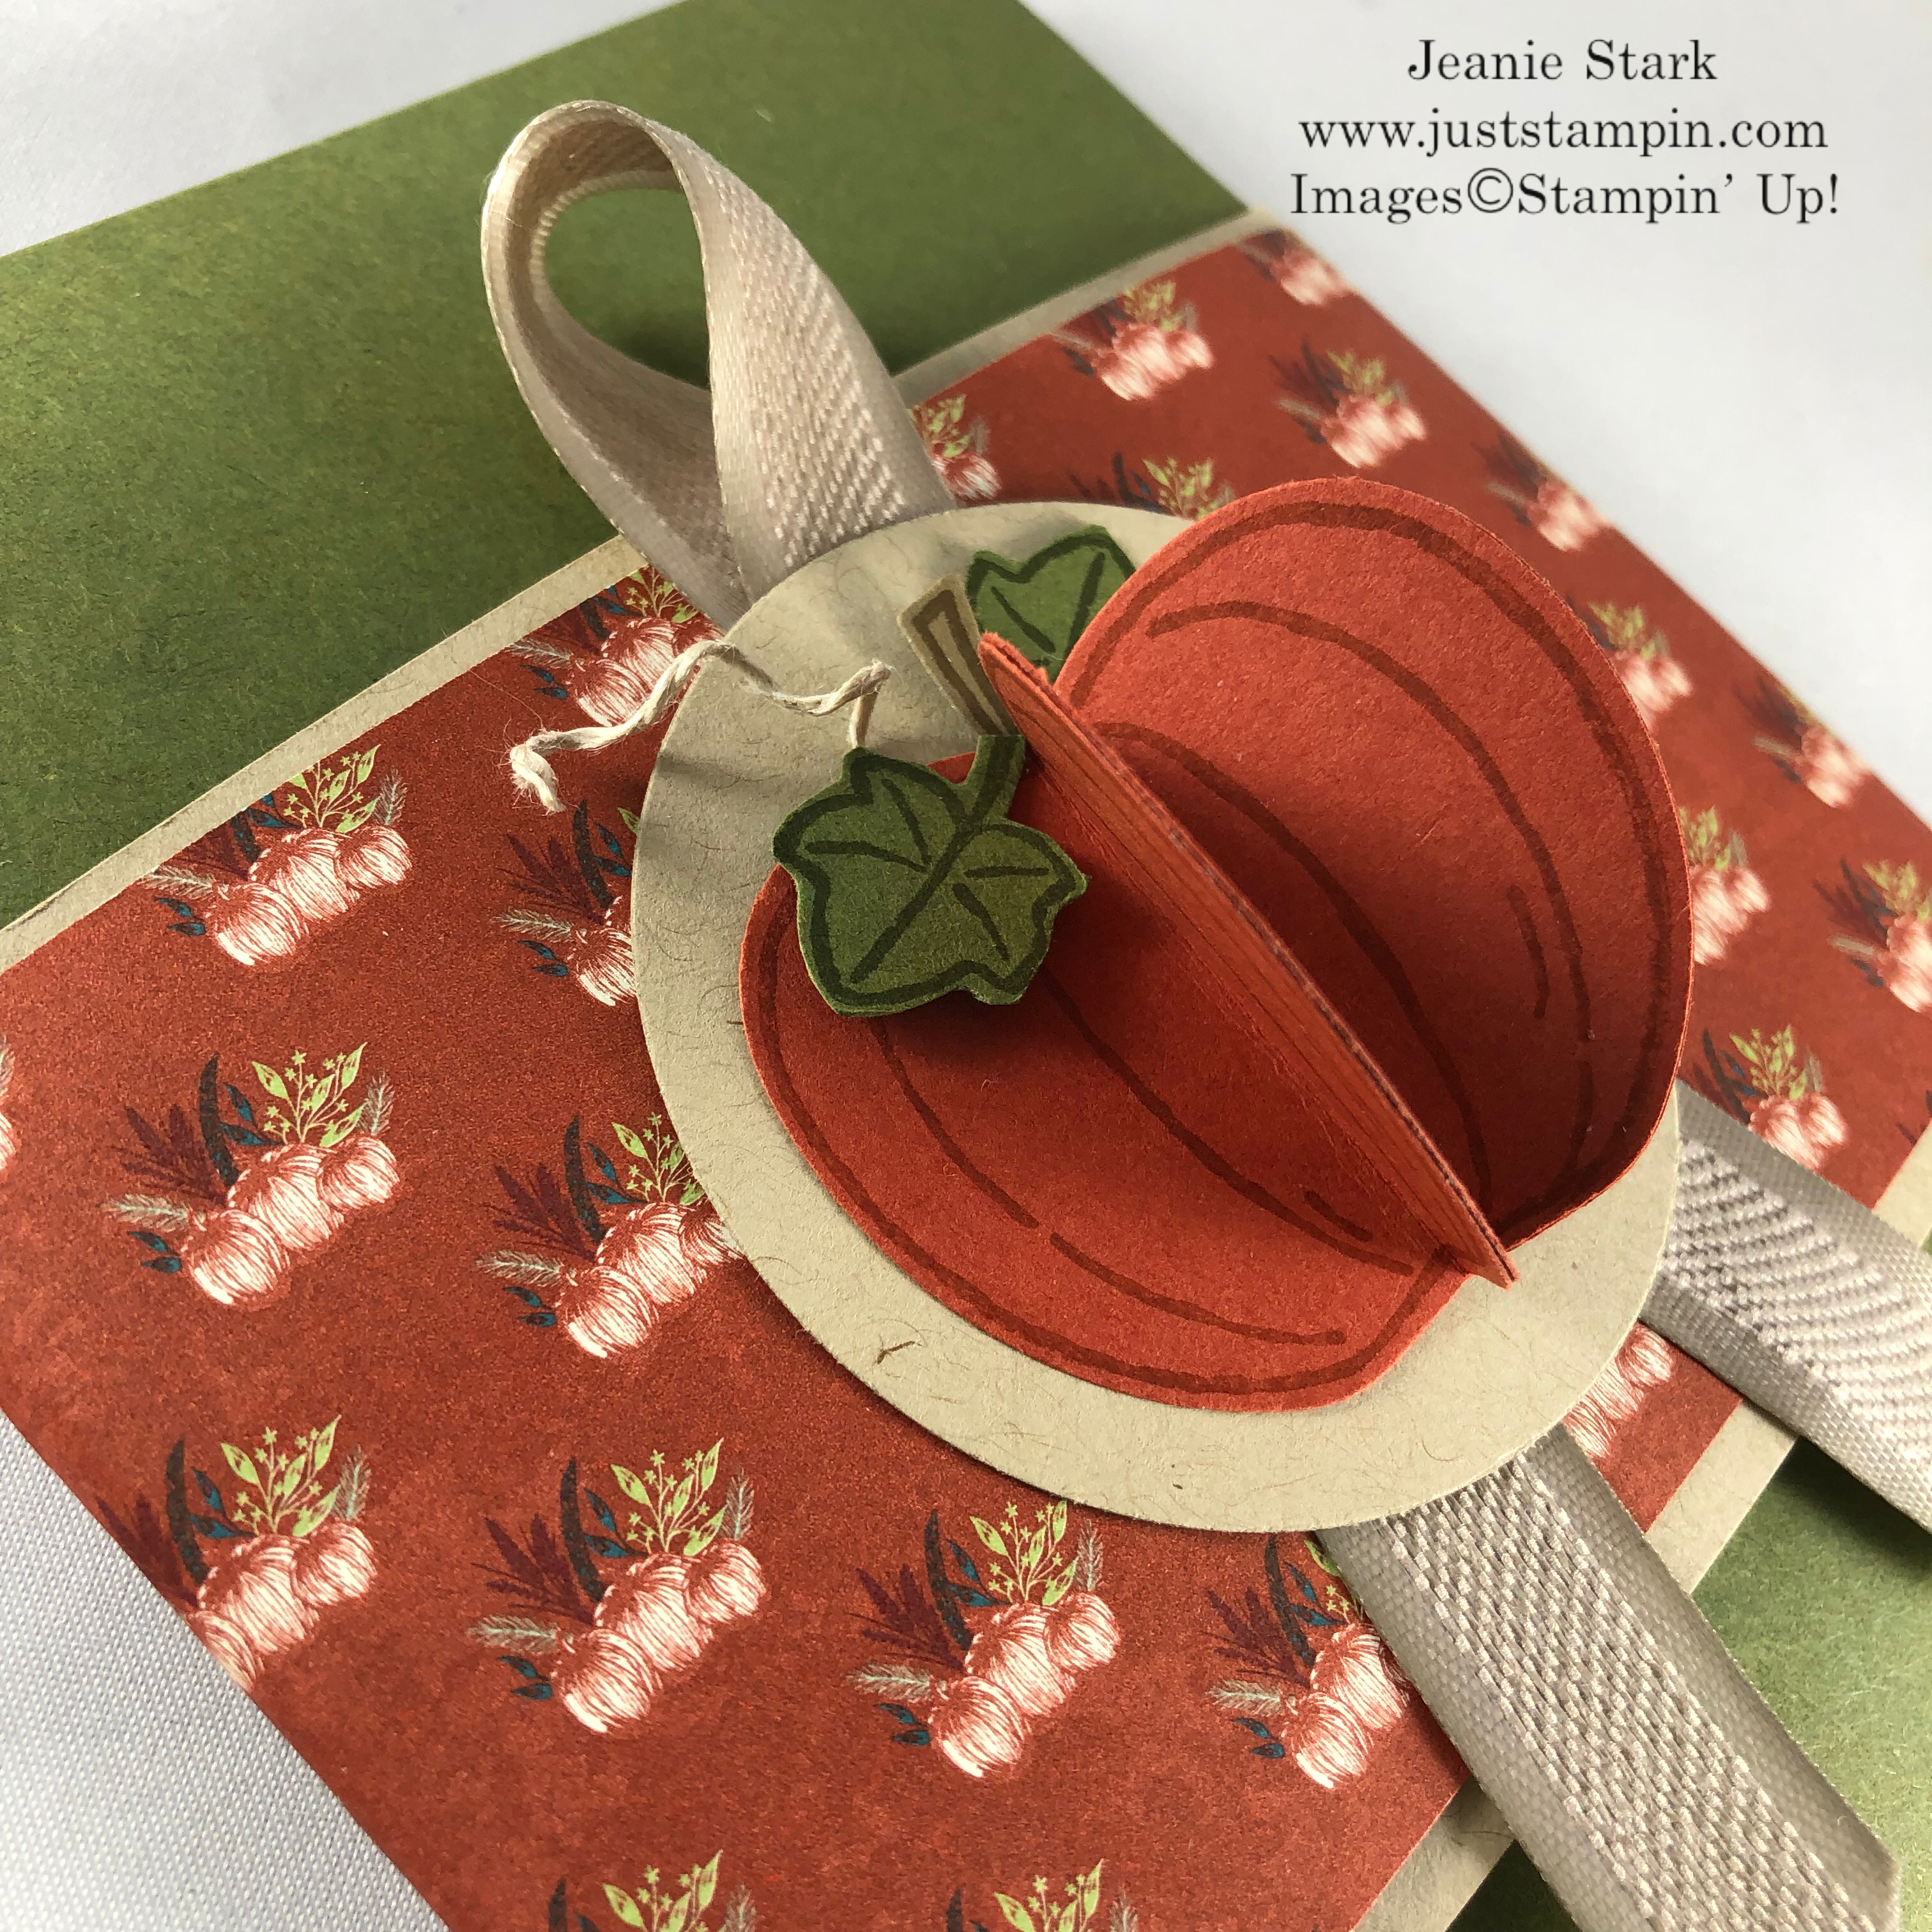 Stampin Up Come To Gather Designer Series Paper, Harvest Hellos Stamp Set and Apple Builder Punch make this 3D pumpkin tag and gift packaging with the Envelope Punch Board - Jeanie Stark StampinUp